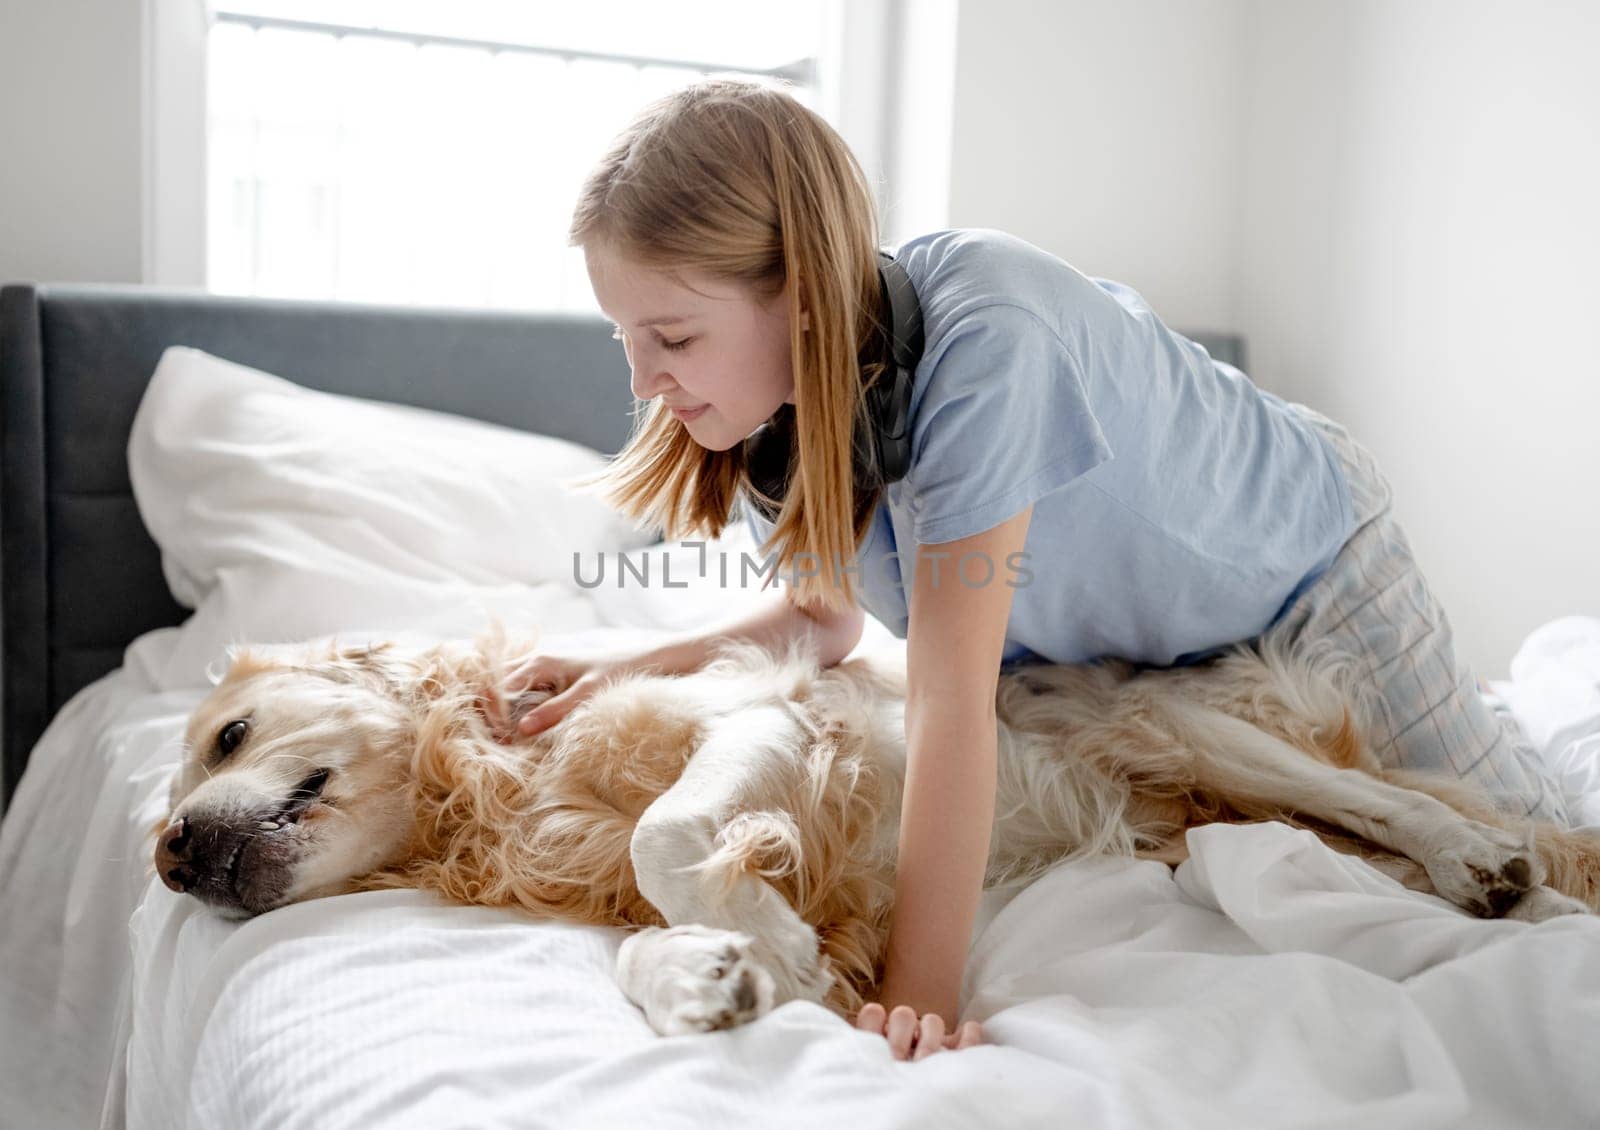 Girl Plays With Golden Retriever On Bed by tan4ikk1